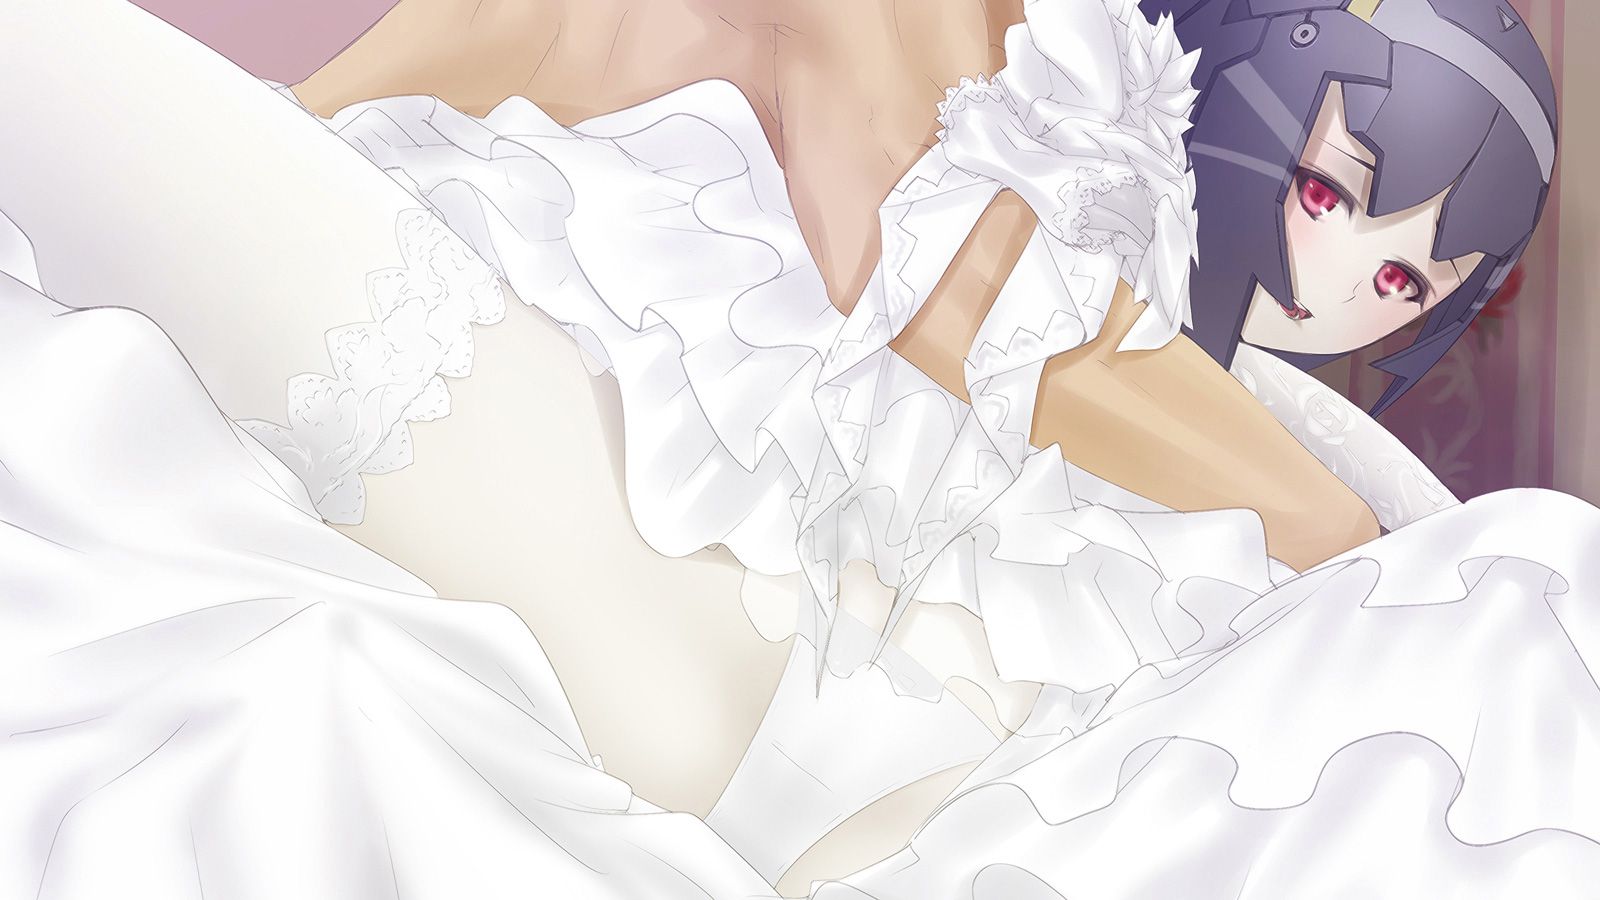 Secondary images of the girl wearing a wedding dress and 4 50 sheets [erotic and non-erotic] 6